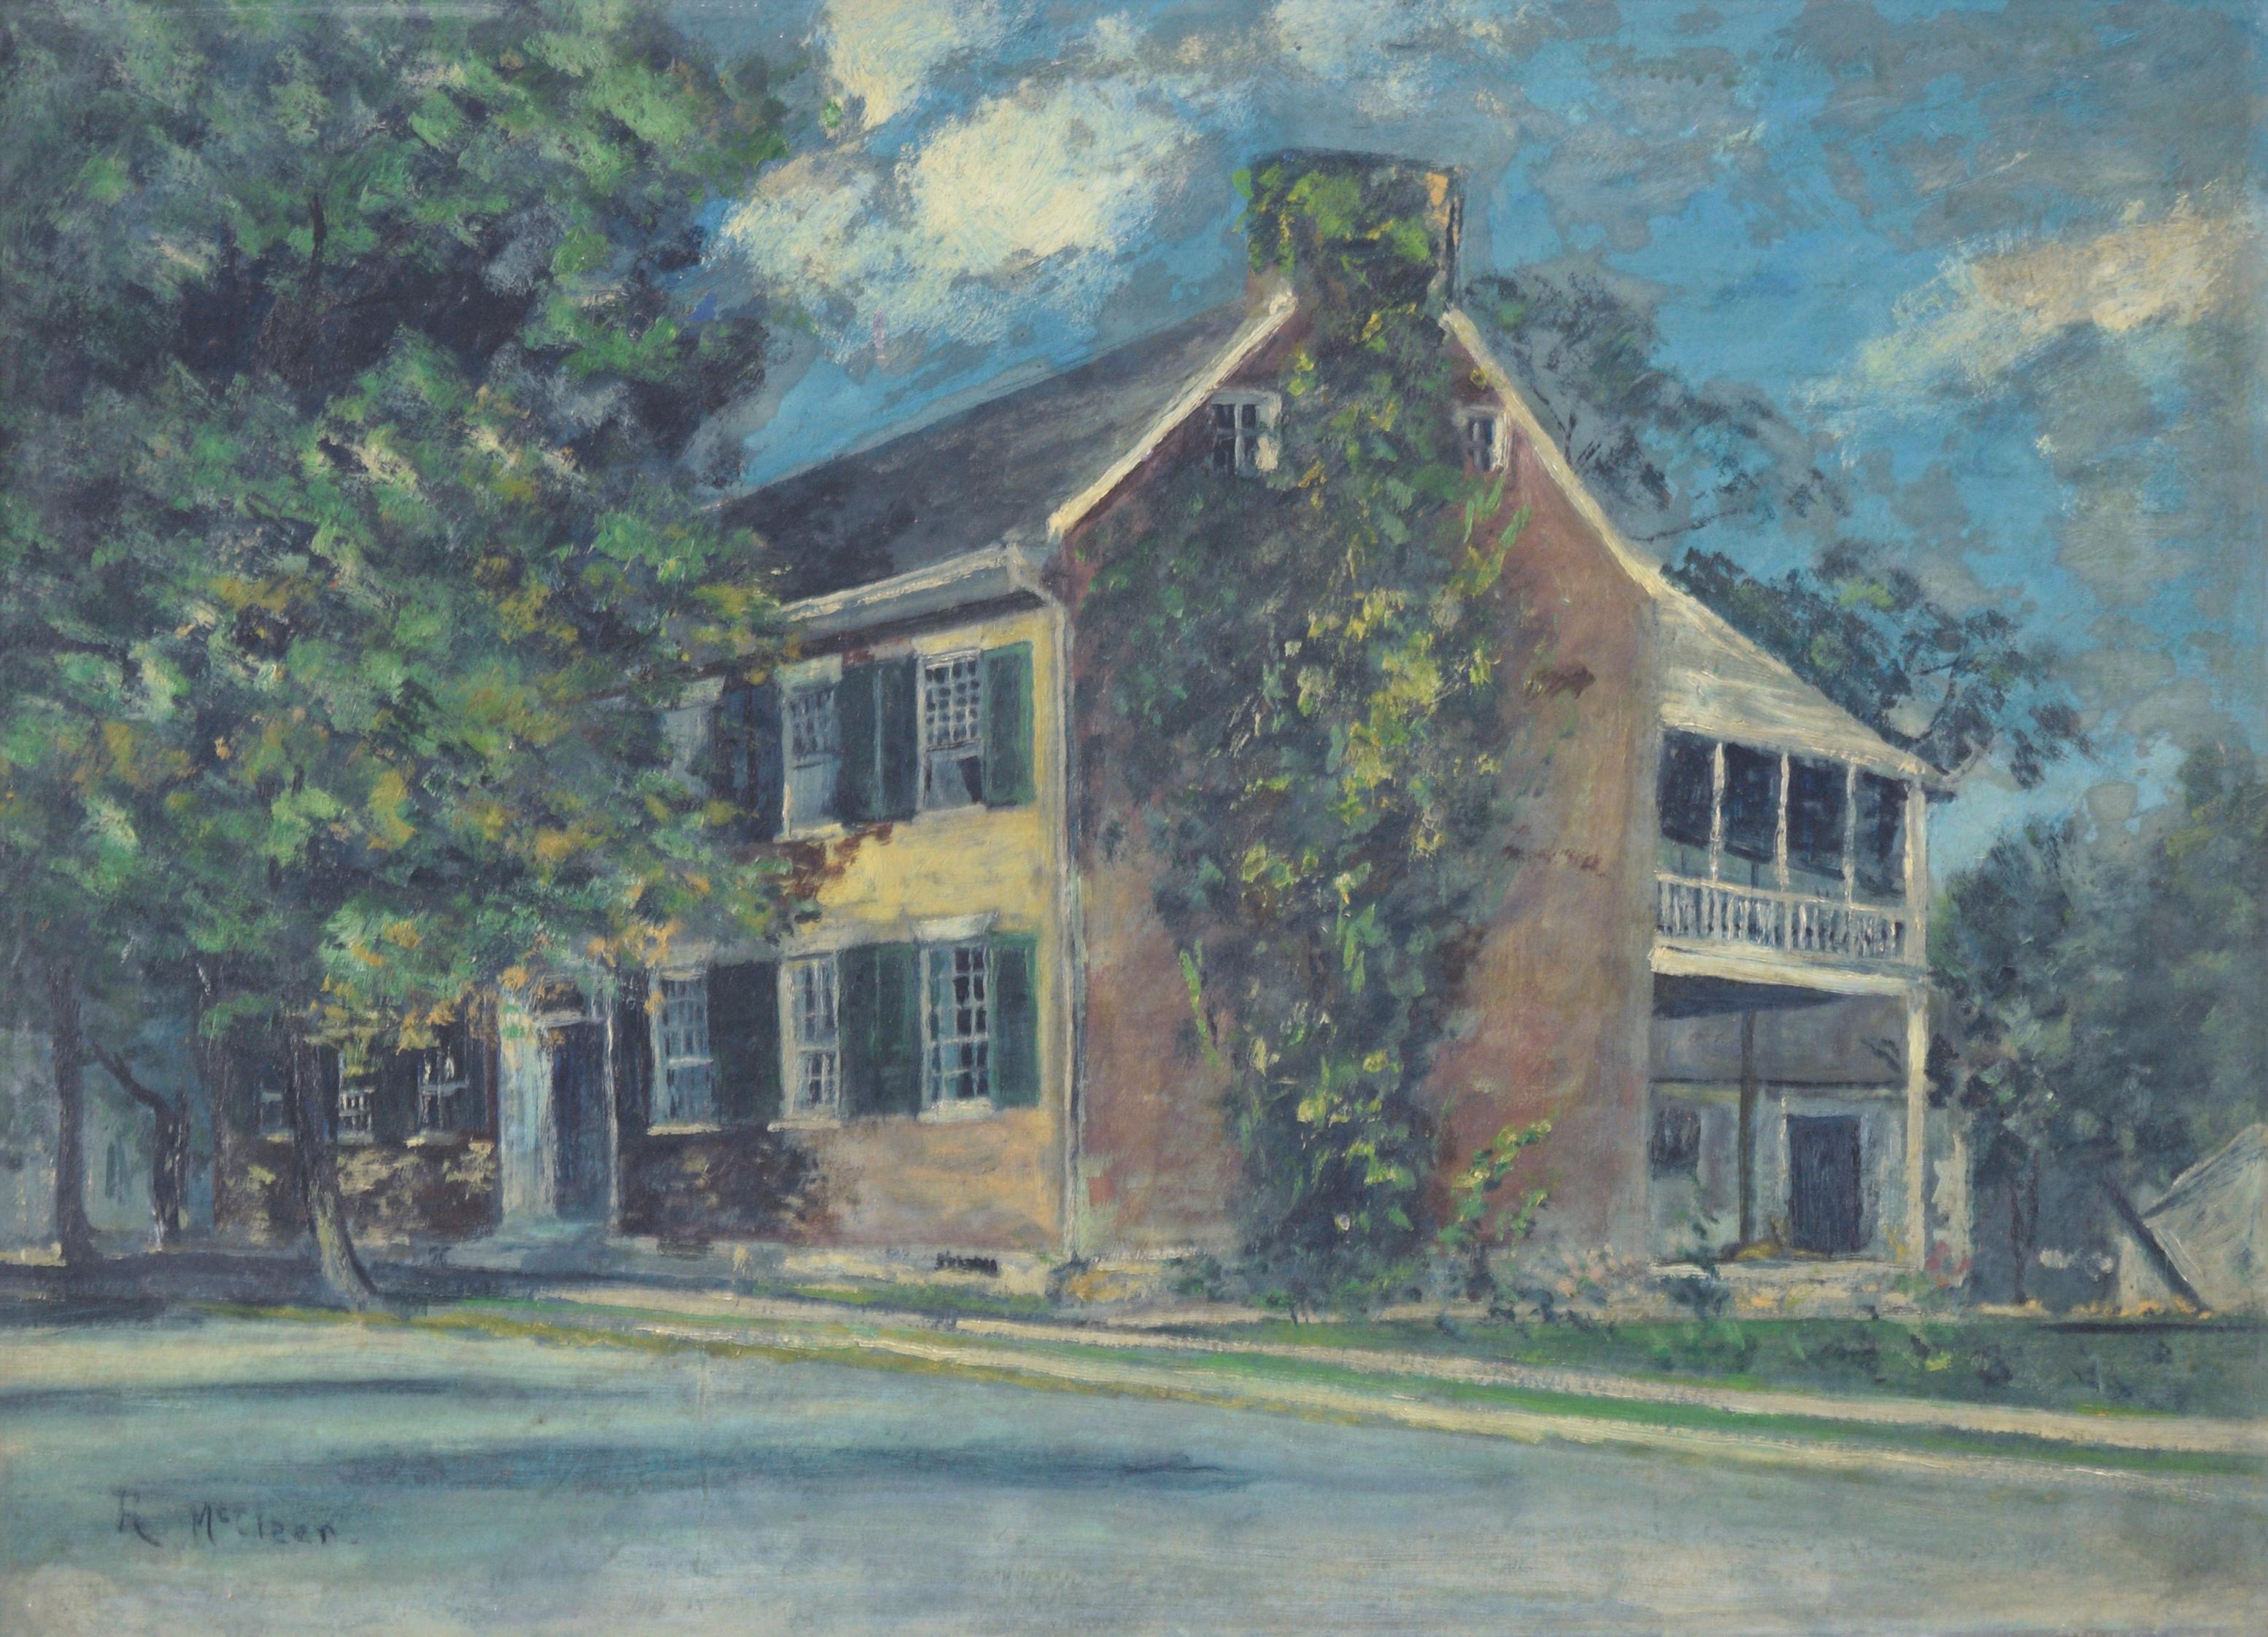 Historical Home Russellville Kentucky 1930 - Painting by Roberta Fisk McClean